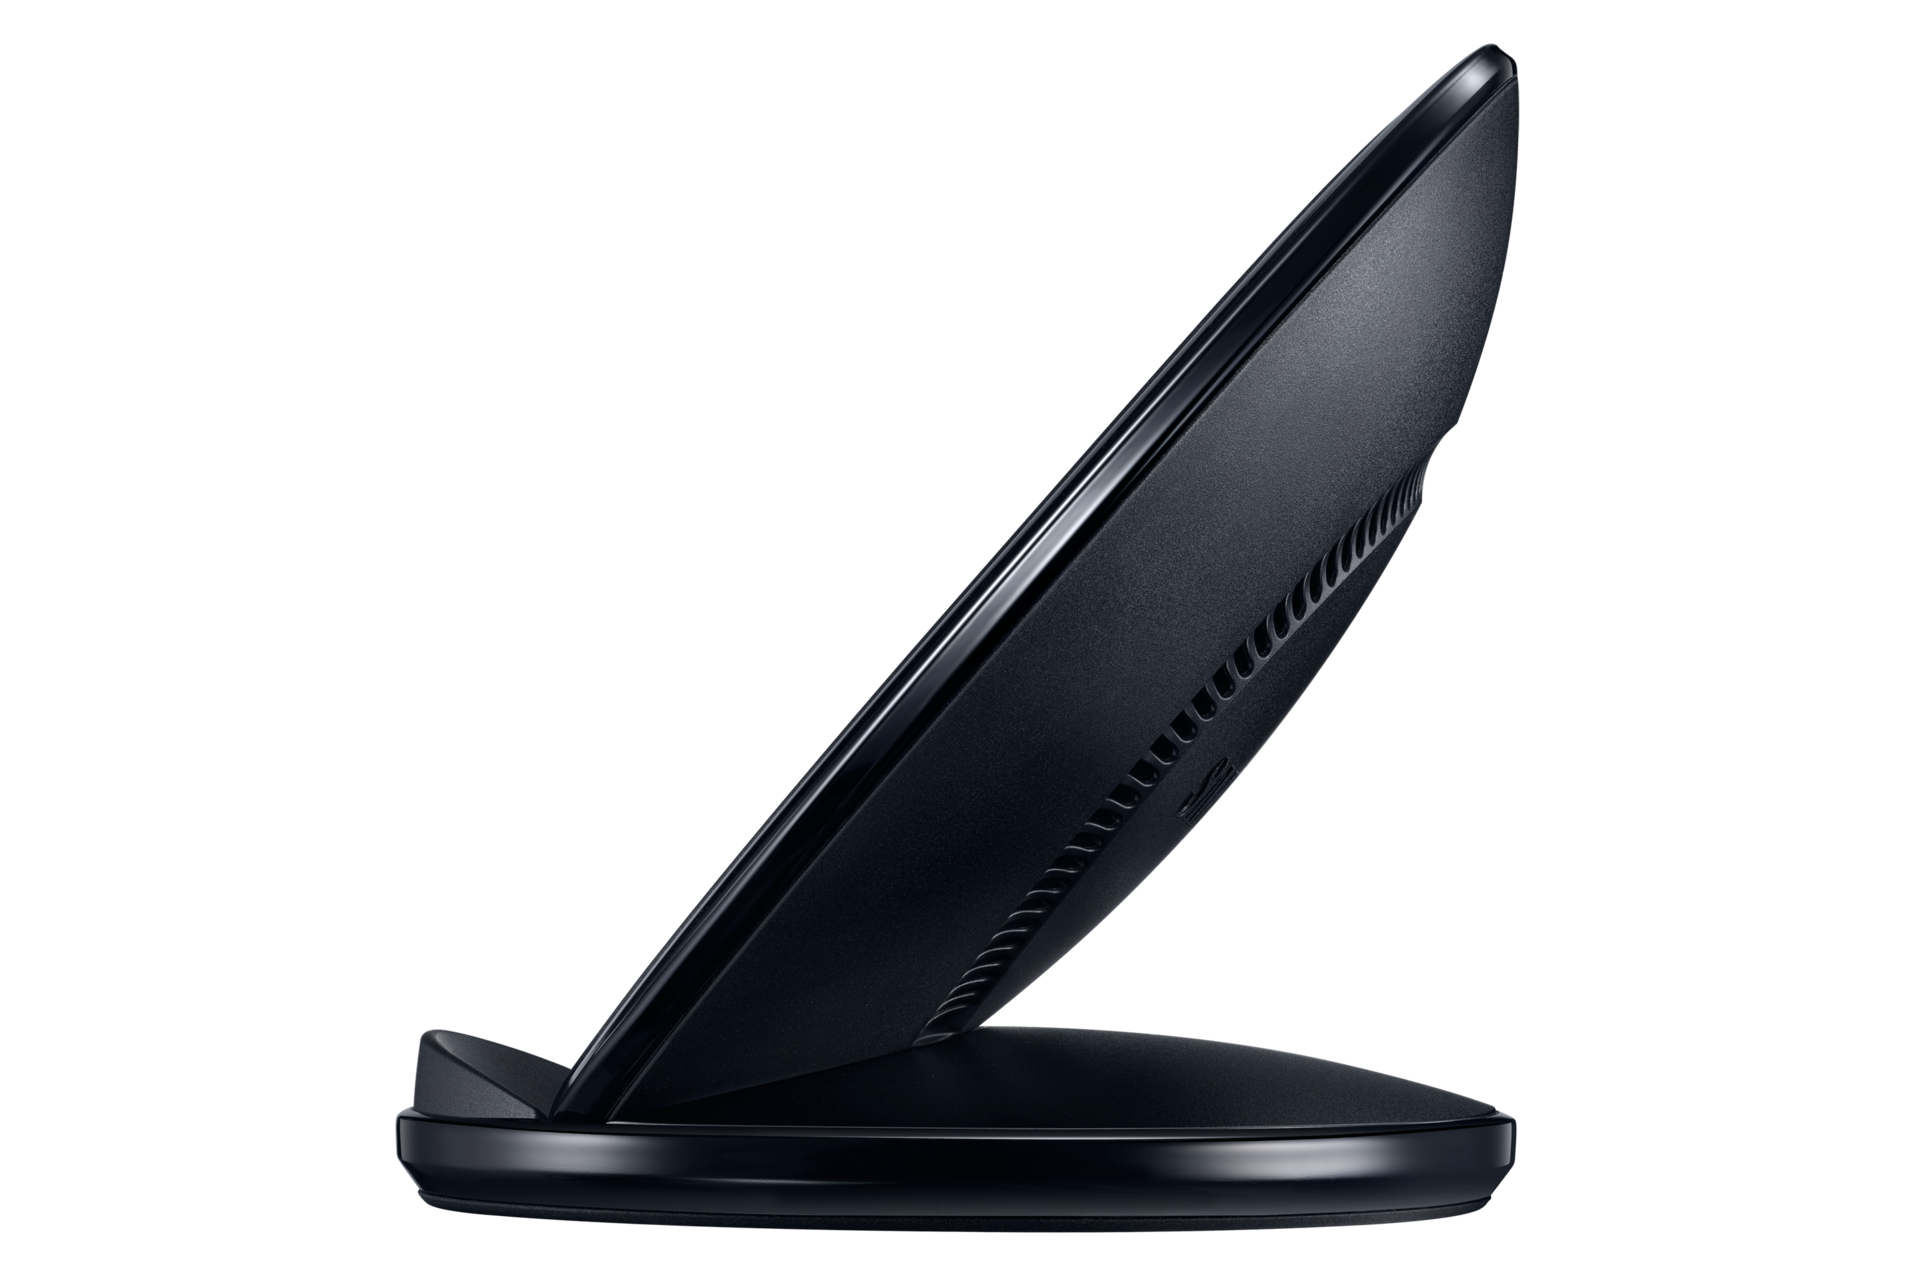 Wireless charger Galaxy S7/S7 edge, EP-NG930BBEGWW